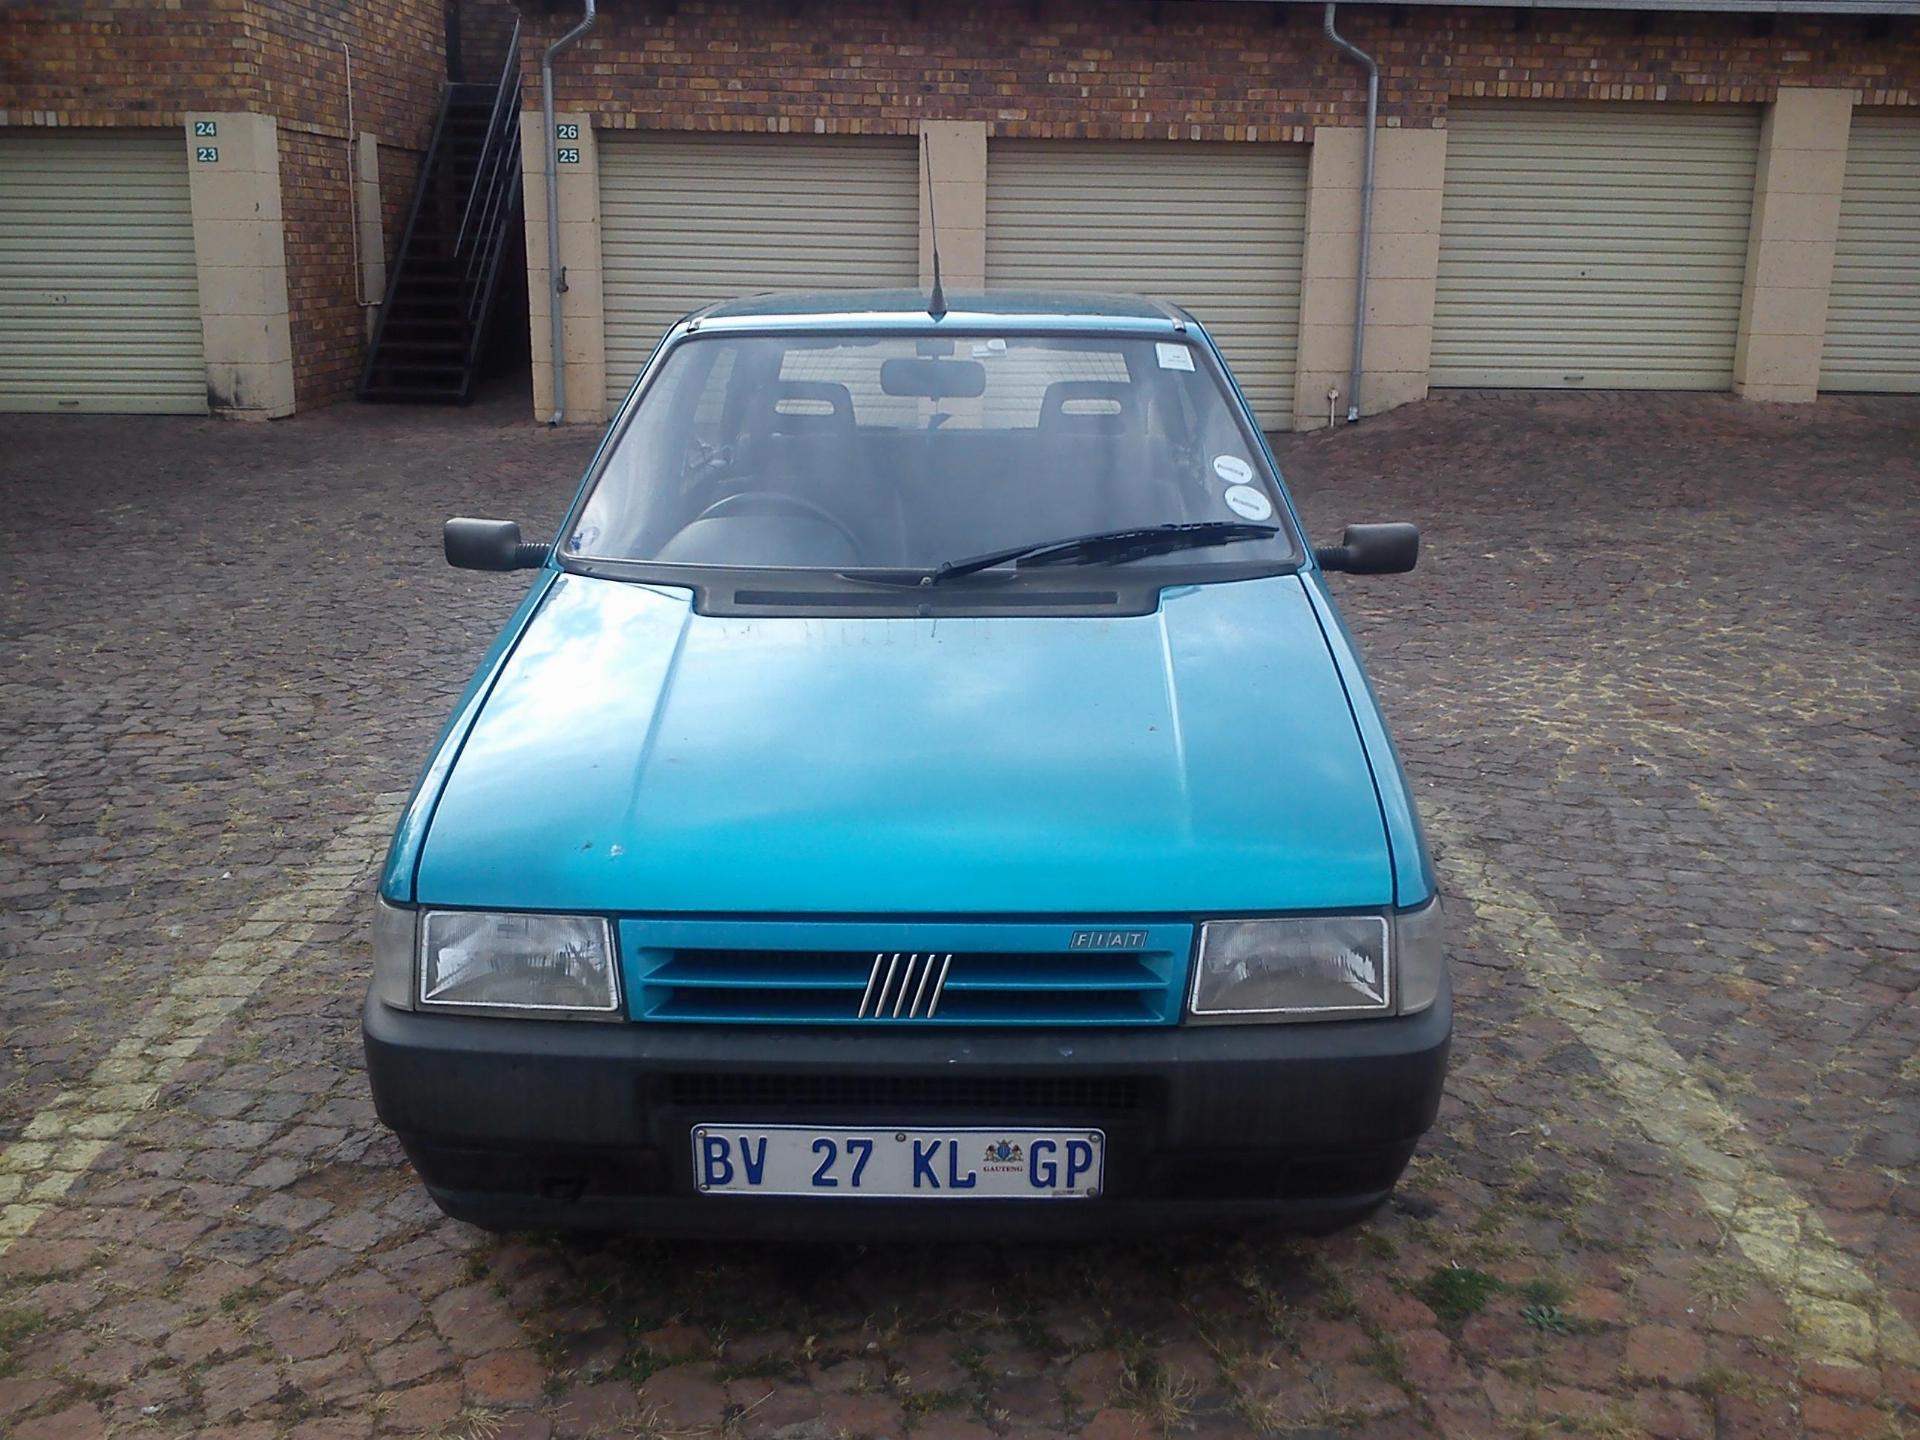 Fiat Uno Light ON Fuel And A Keeper